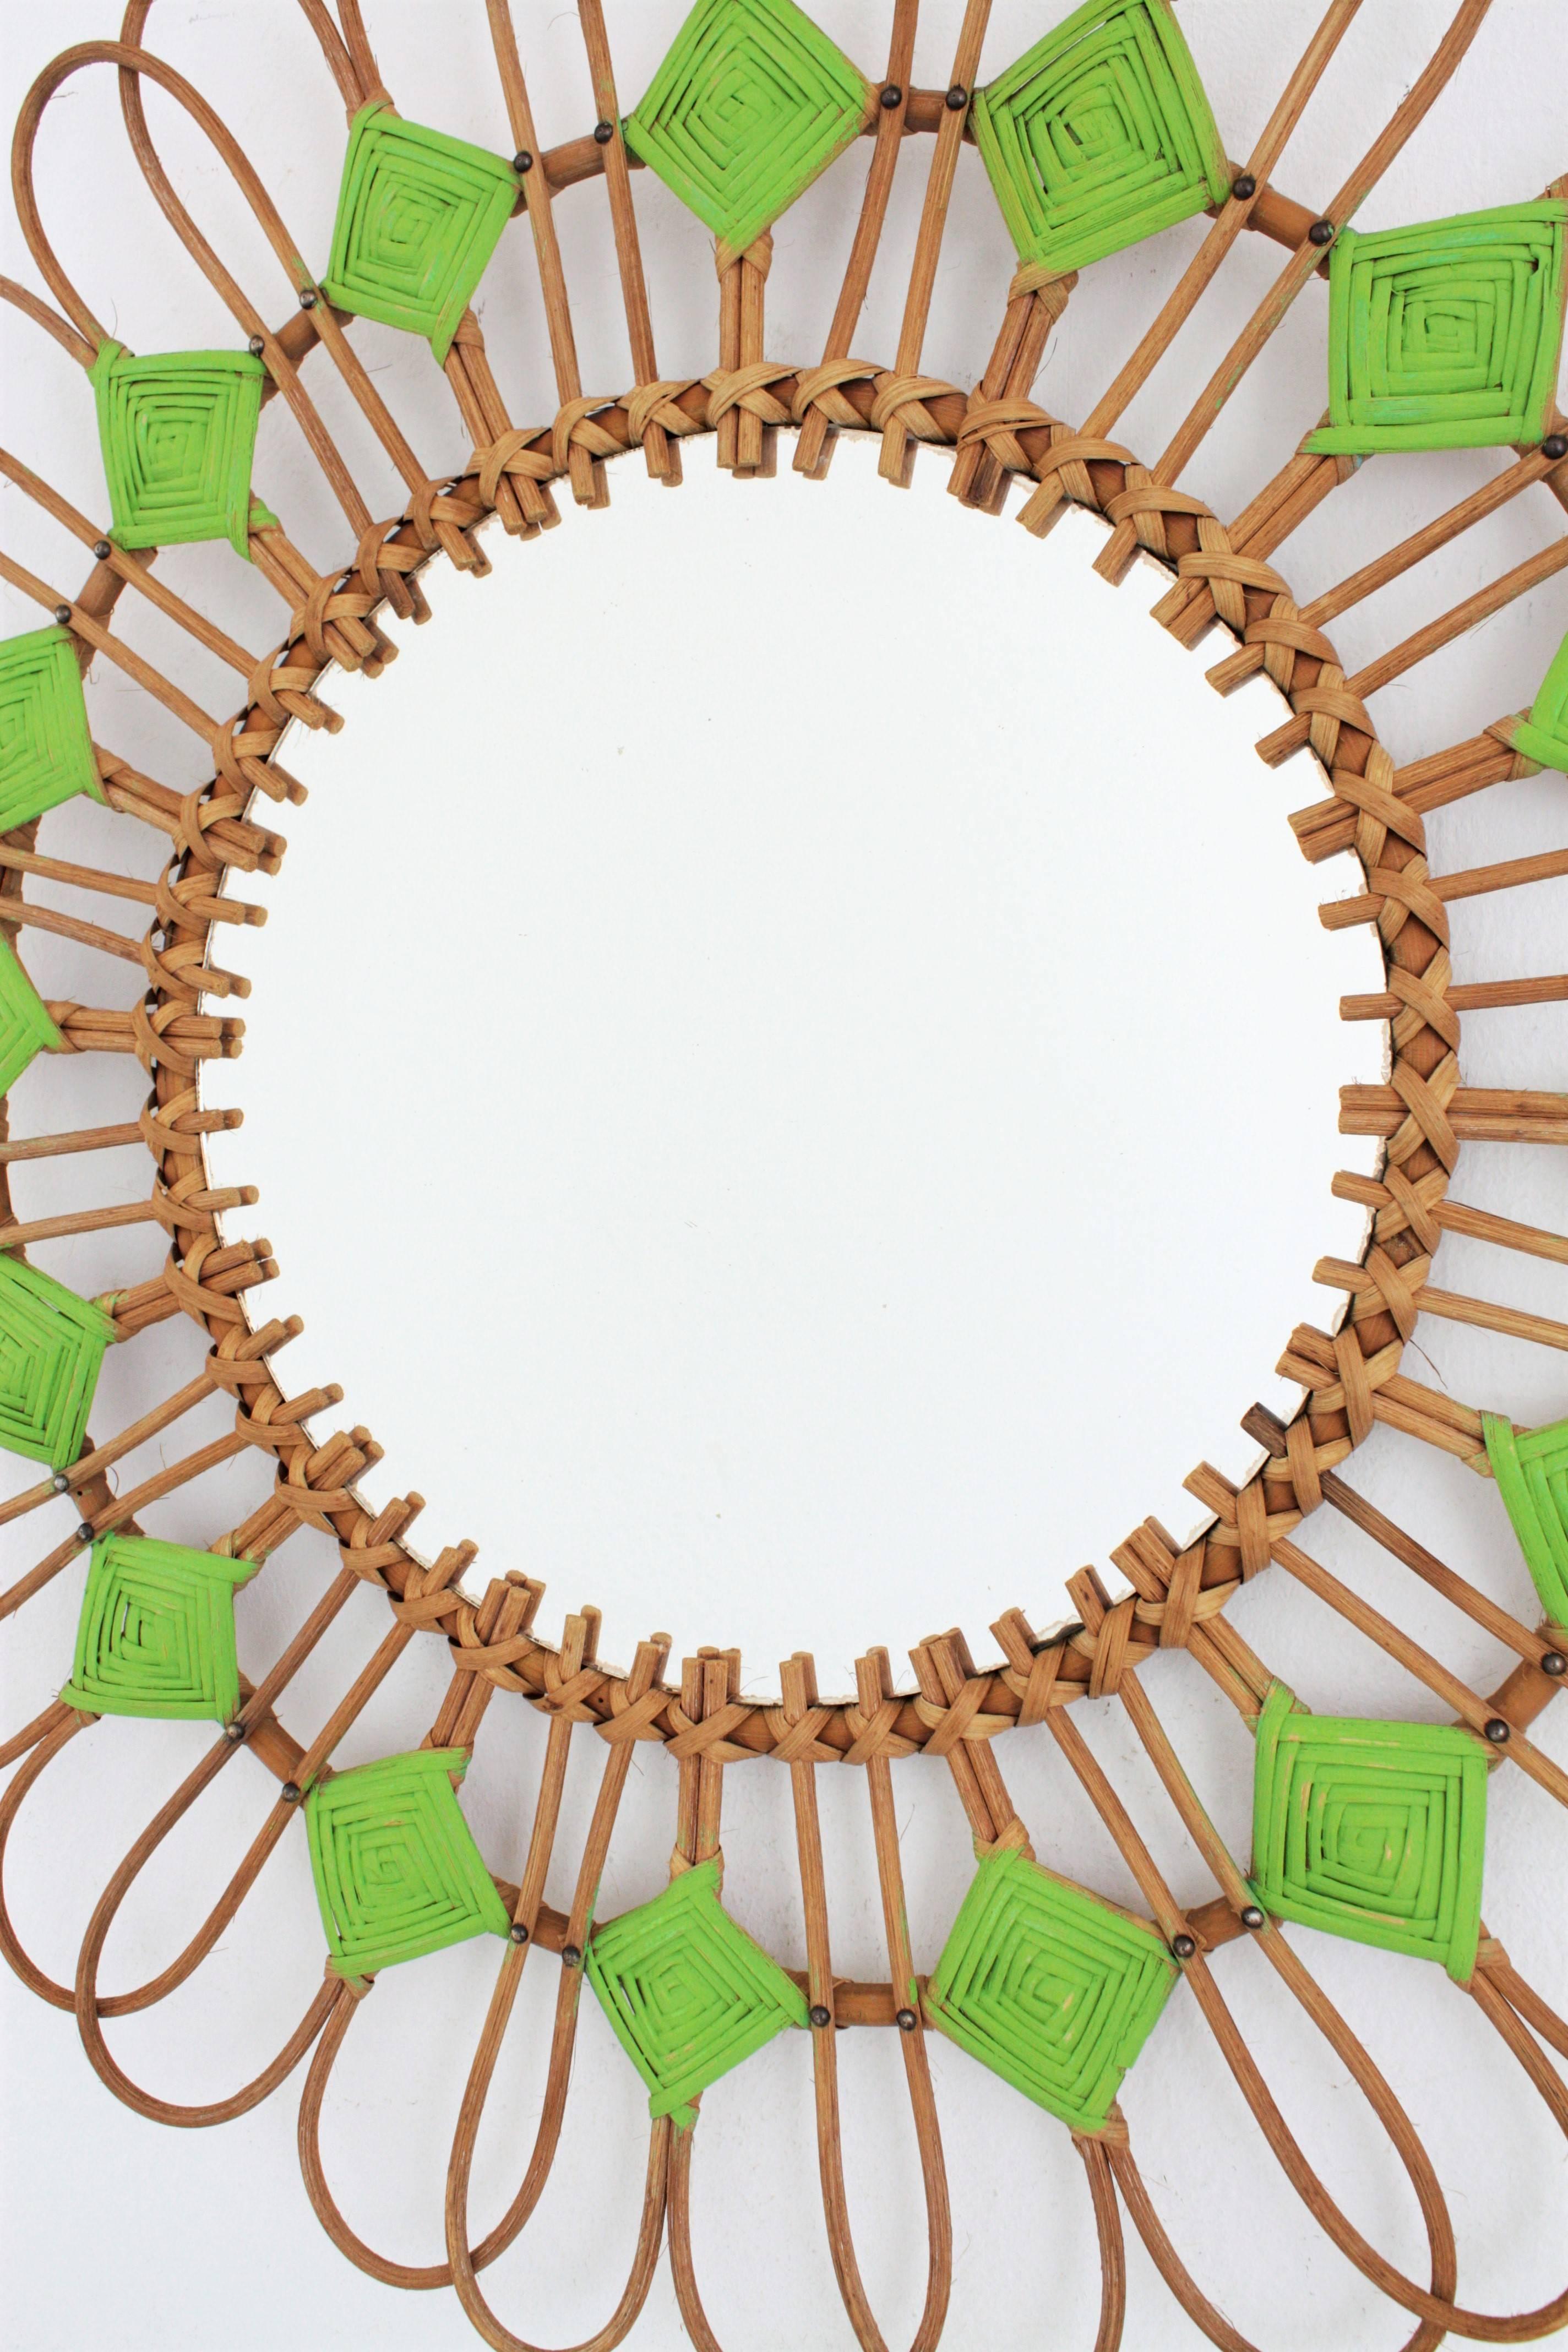 Spanish rattan sunburst flower mirror with green rhombus details, 1950s
Unusual handcrafted rattan mirror with green painted rhombus decorations with all the taste of the Mediterranean coast style.
This mirror can add a fresh taste to a